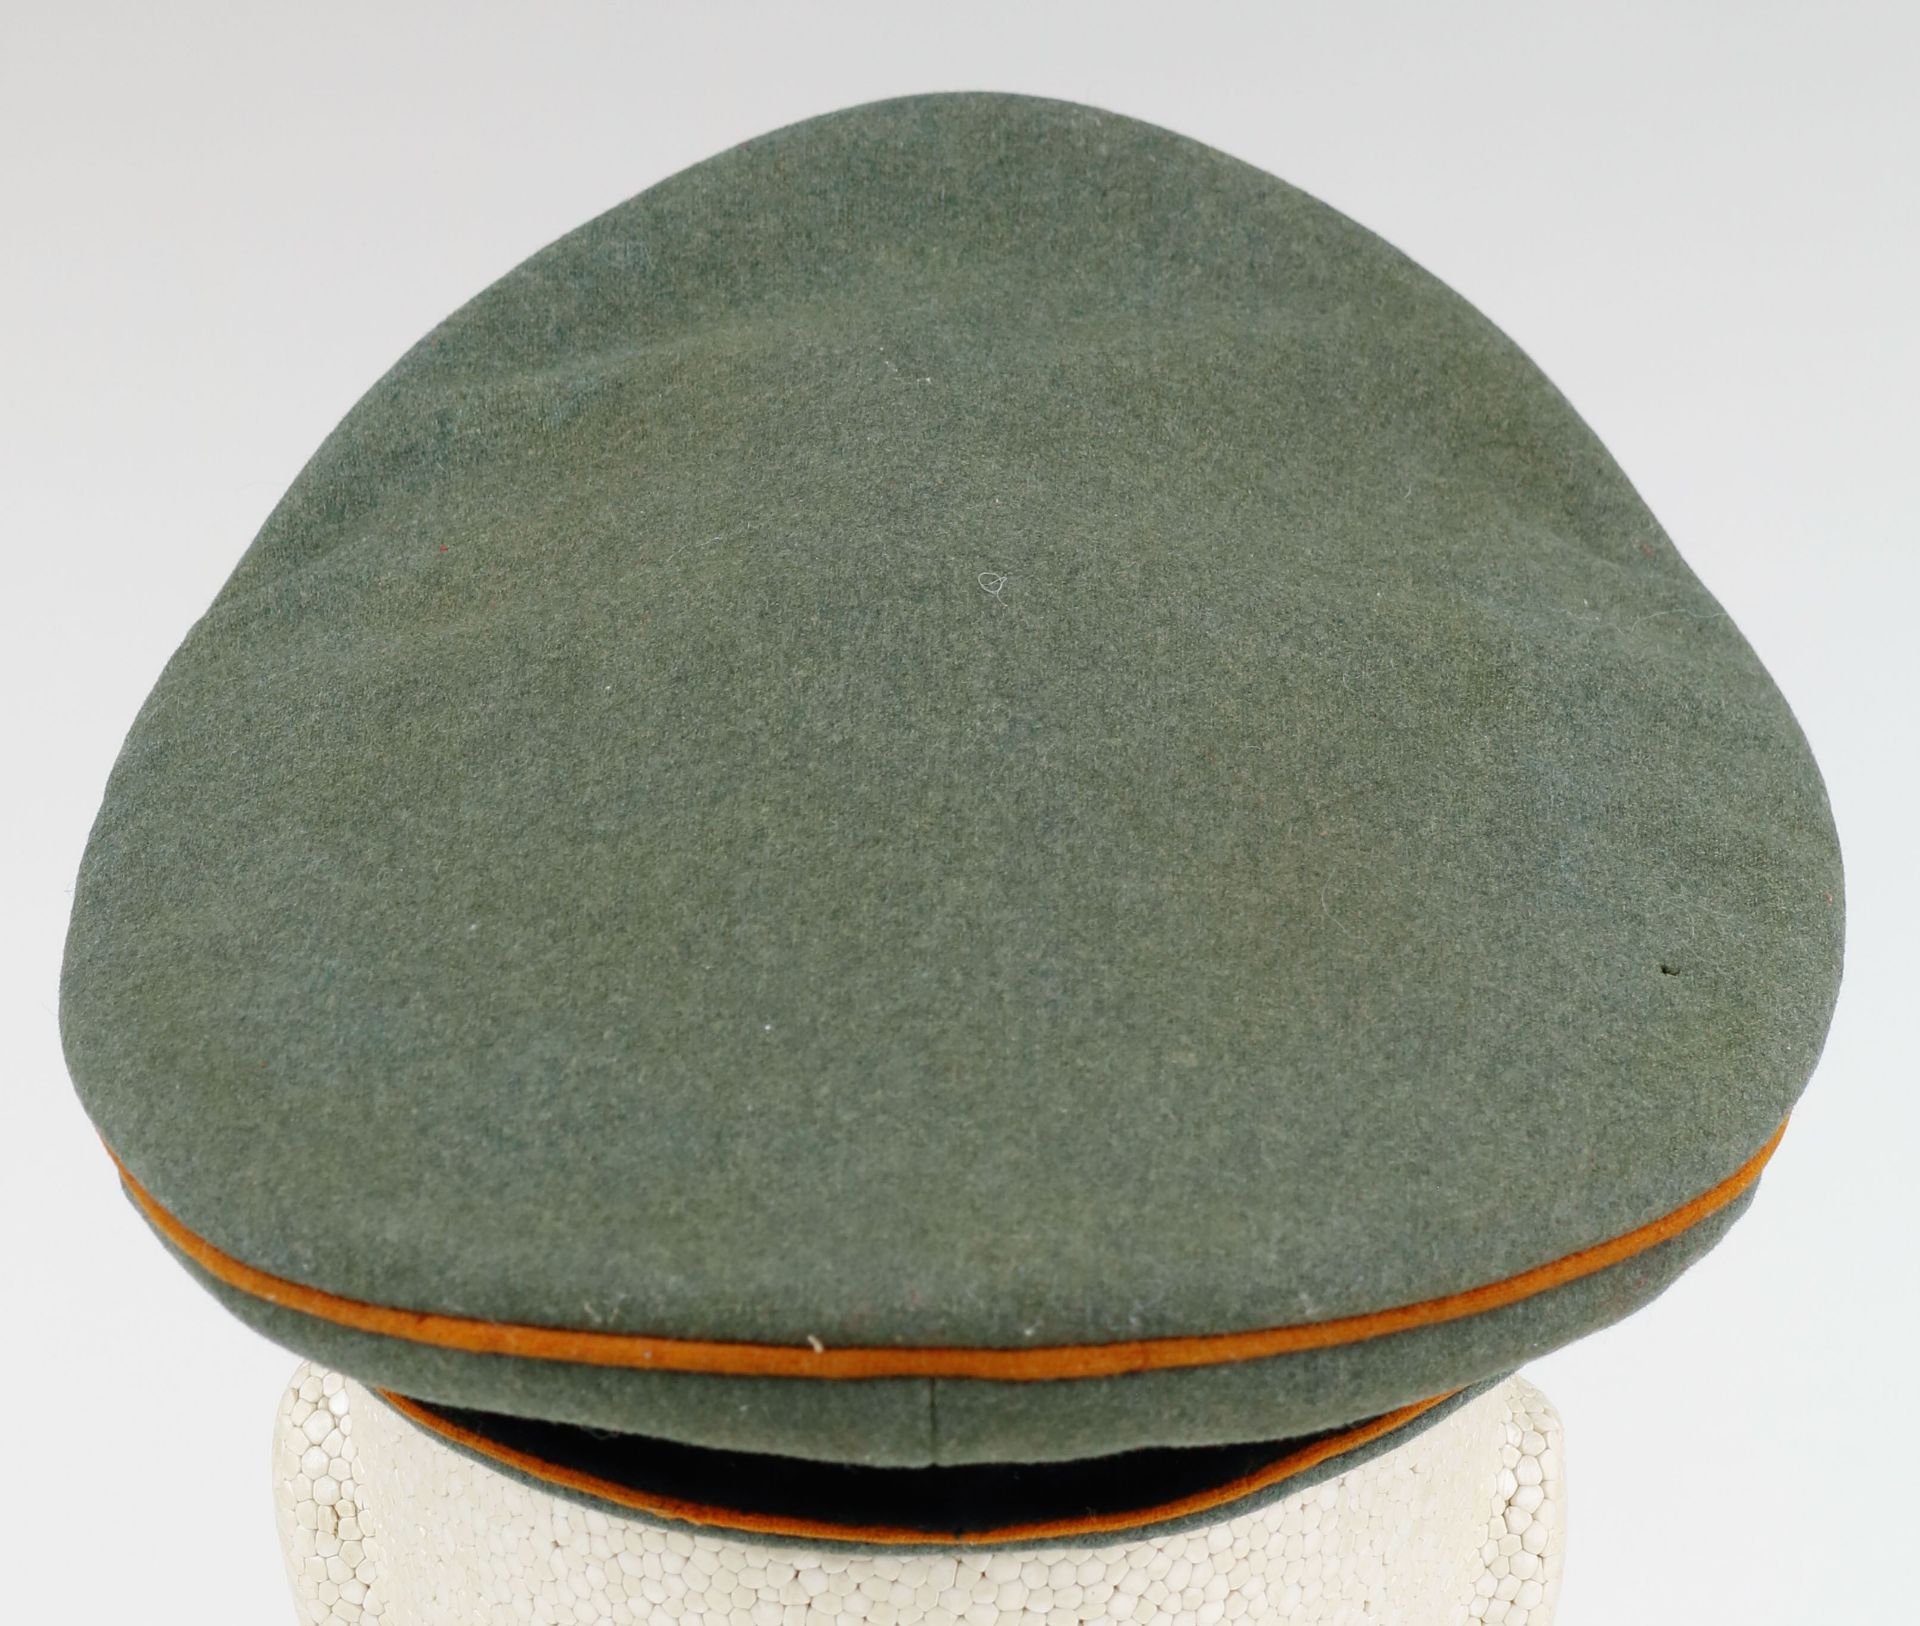 SS CONCENTRATION CAMP 'CRUSHER' VISOR CAP - Image 3 of 17